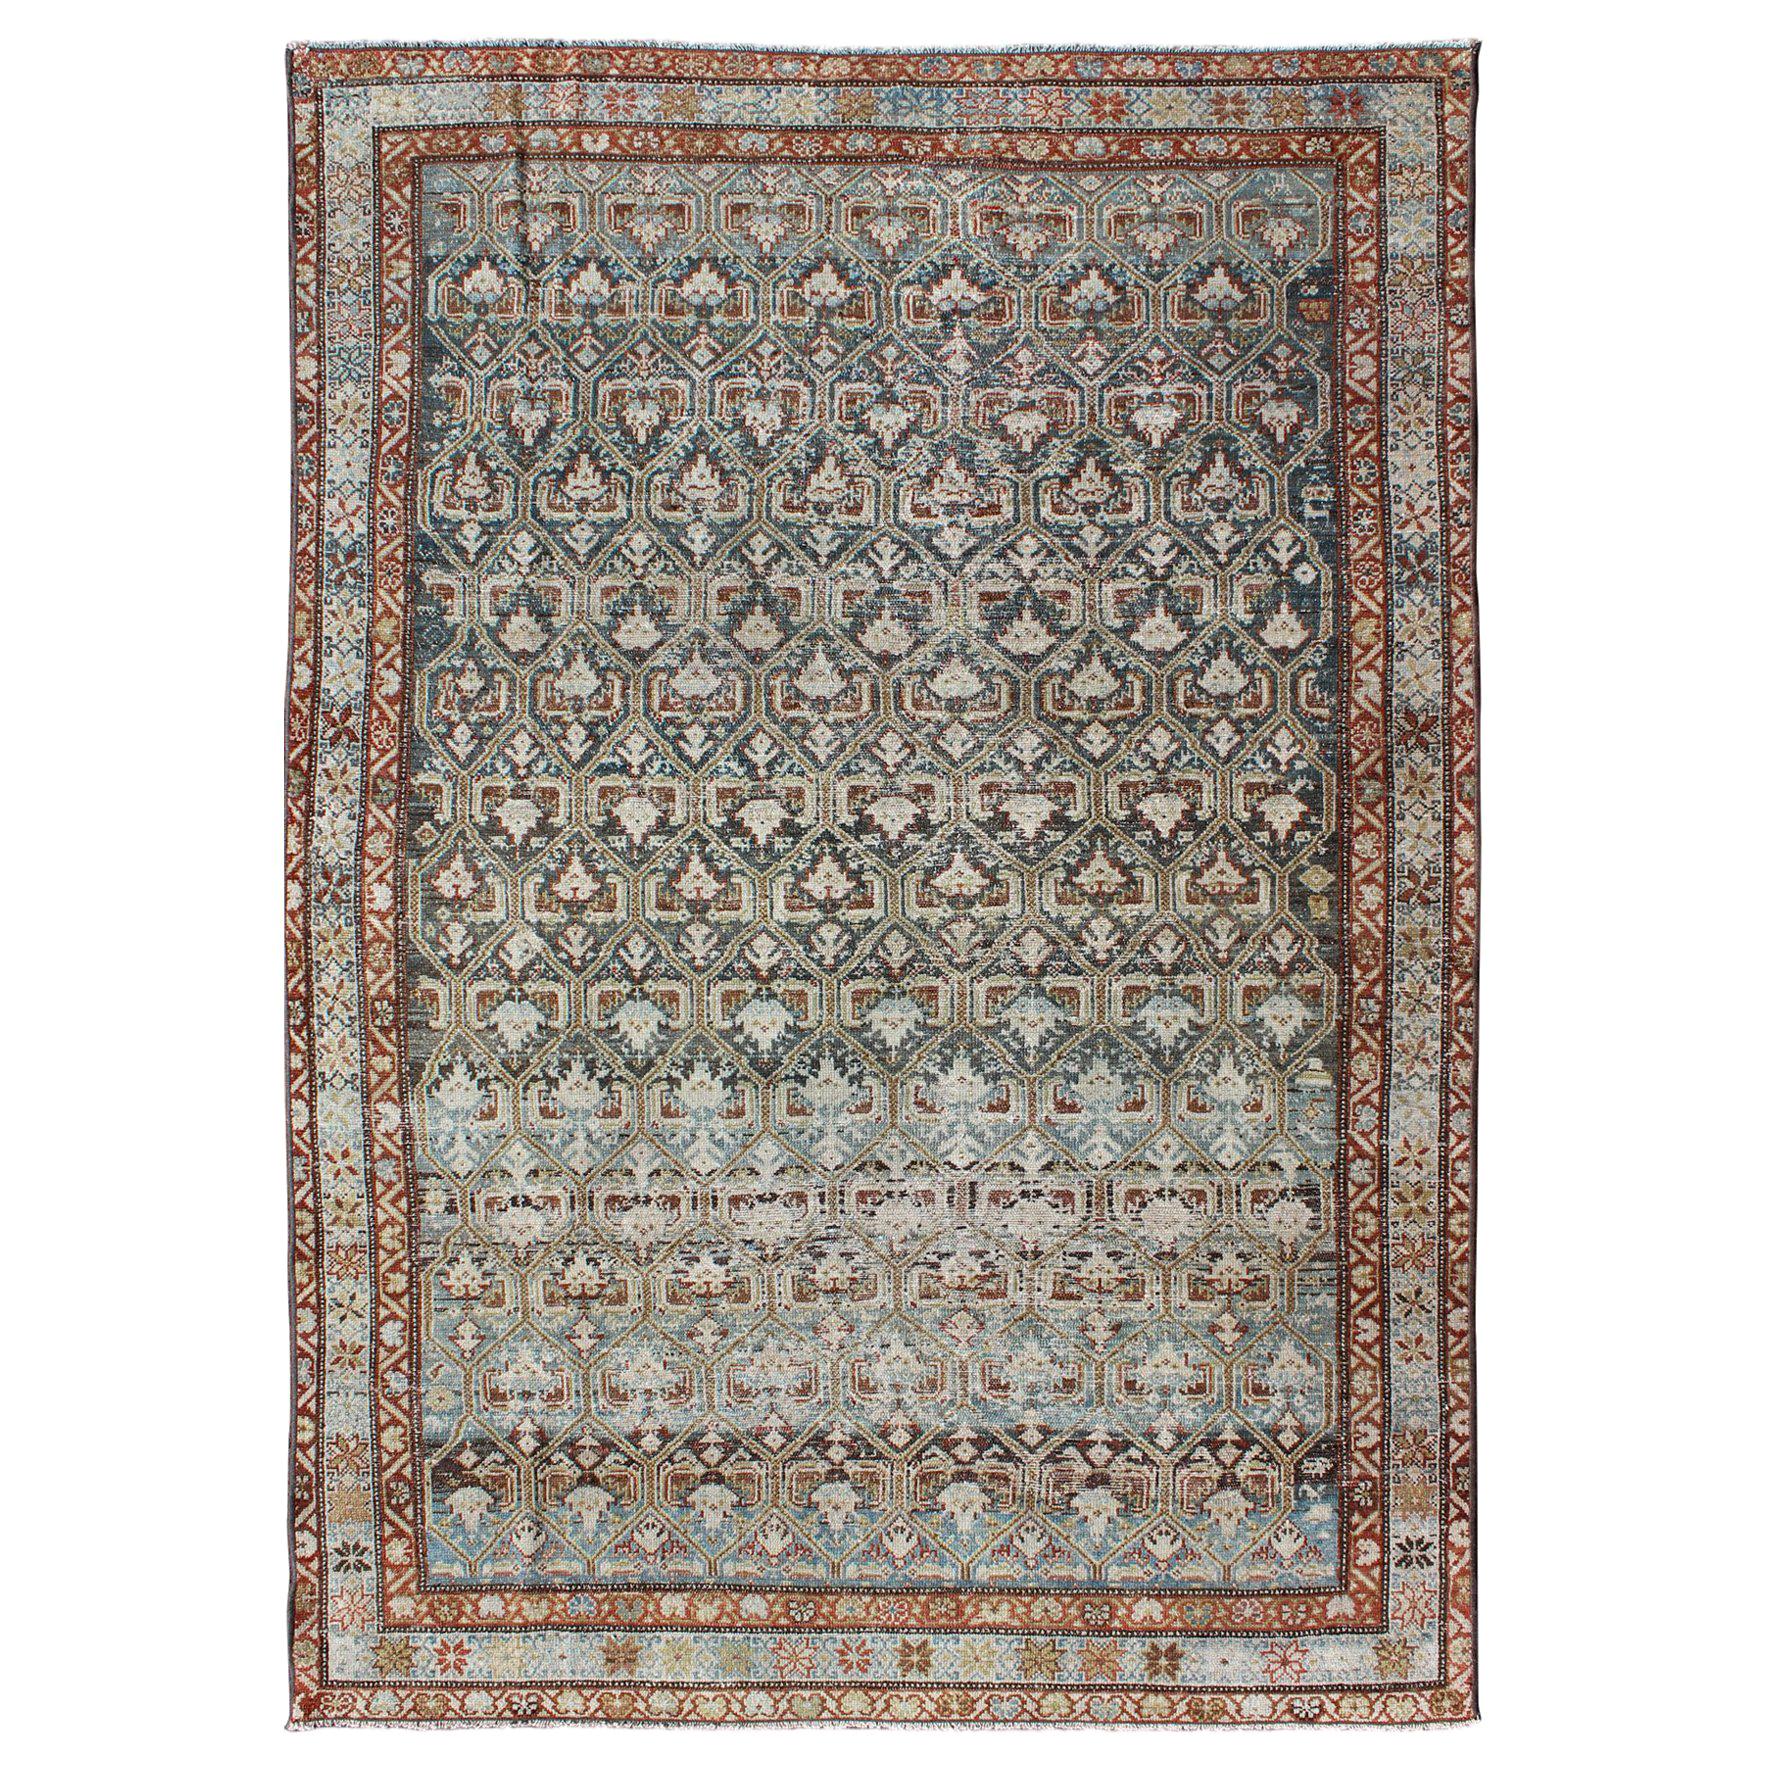 Antique Persian Fine Senneh Distressed Rug with All-Over Geometric Design